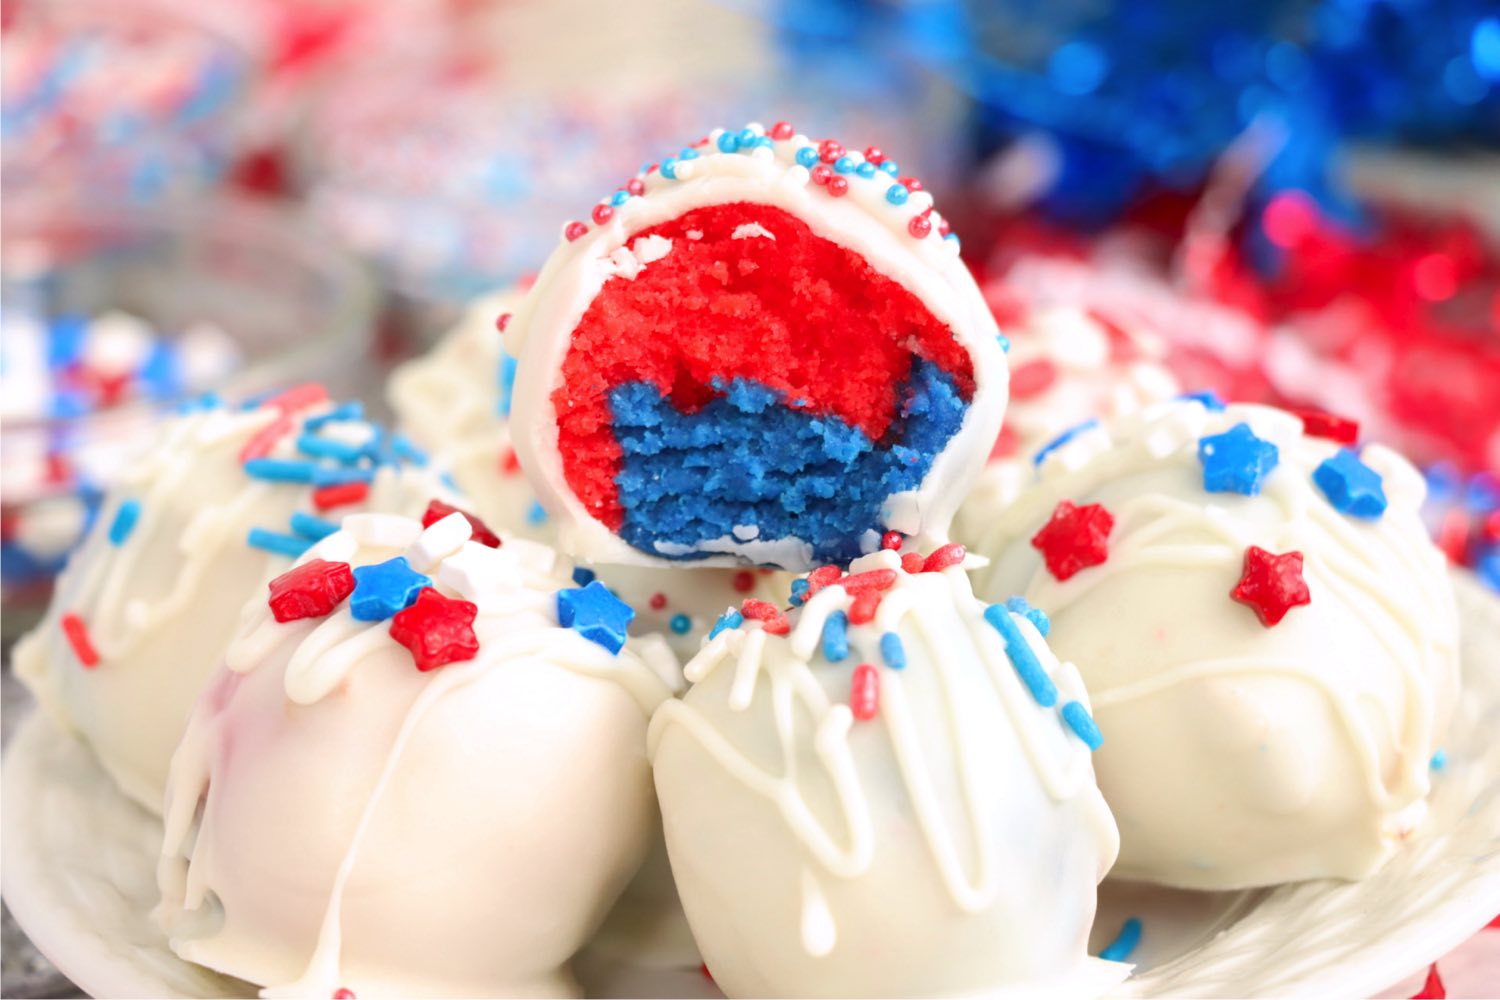 stack of vanilla coated truffles with a half eaten red, white and blue truffle on top.